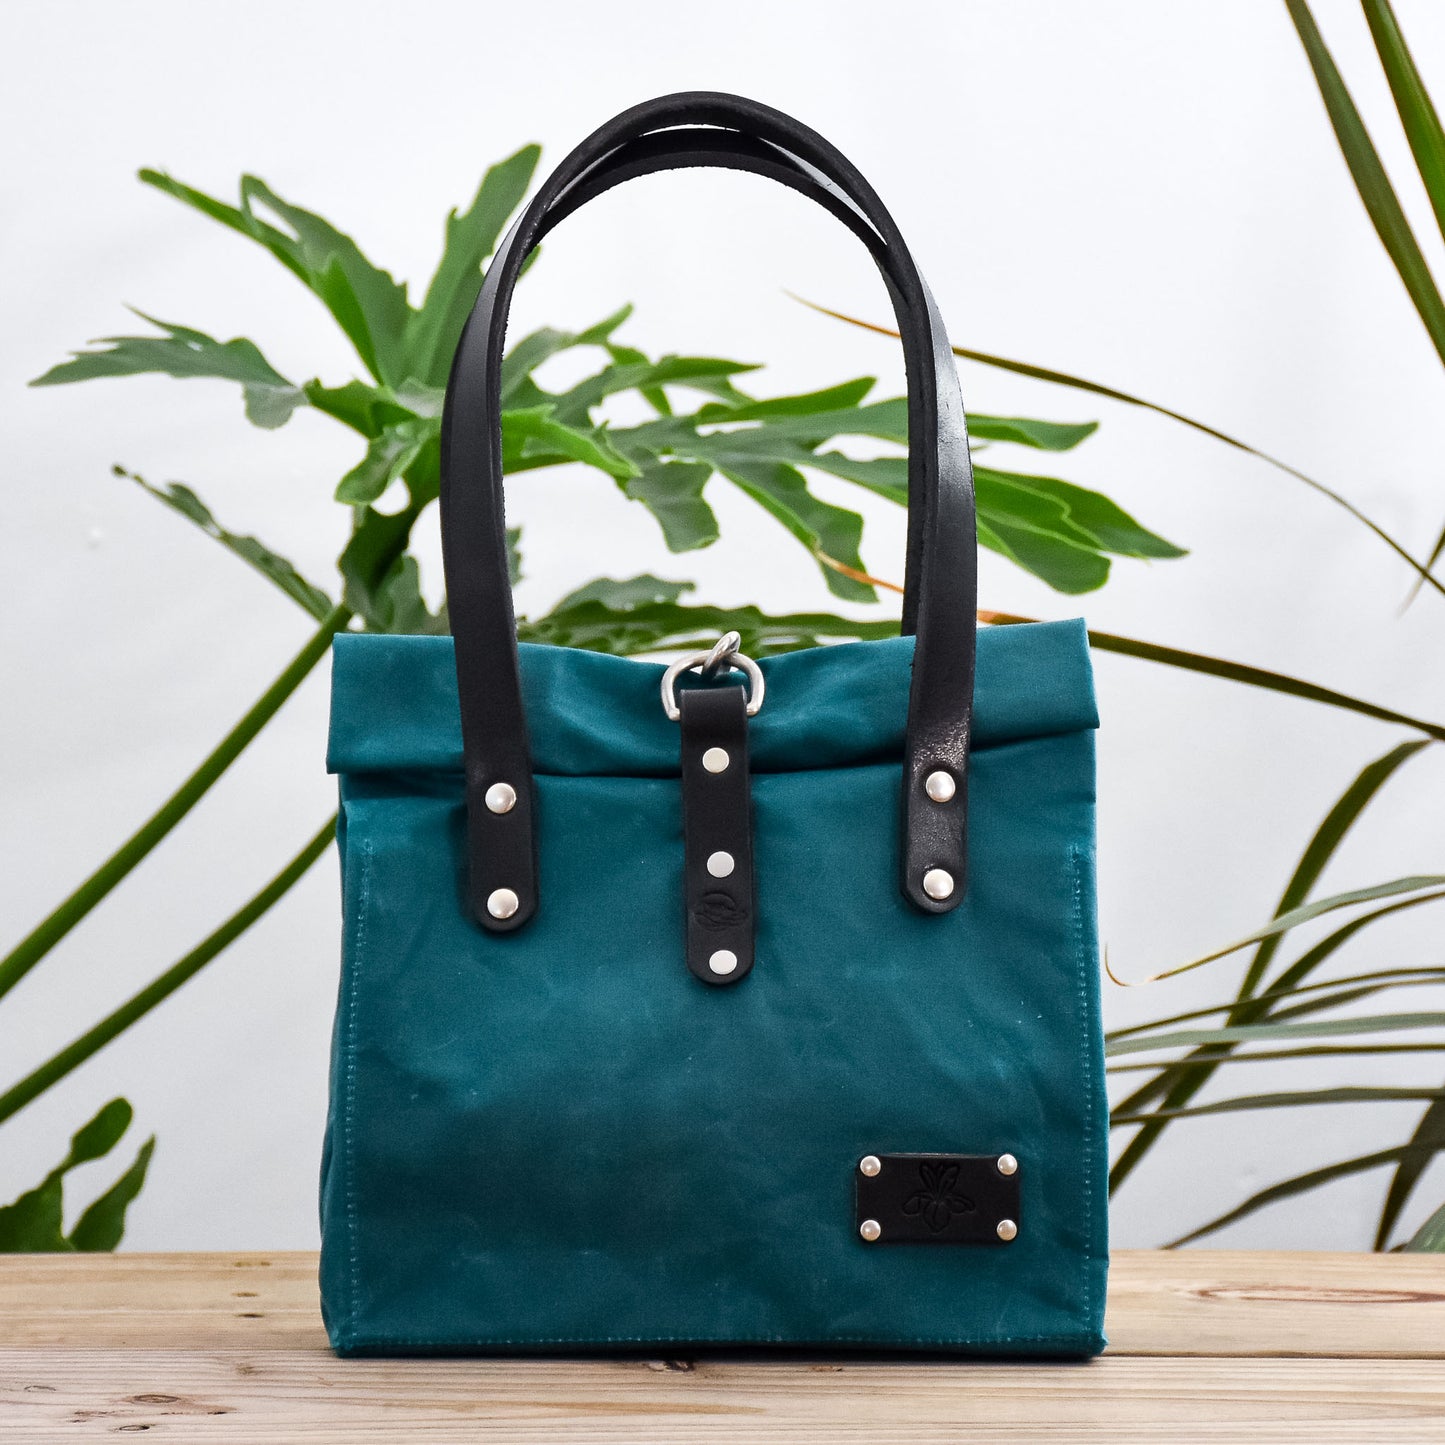 Miss Babs x Blue Spring Craft Spring 2021 - Teal and Splashy